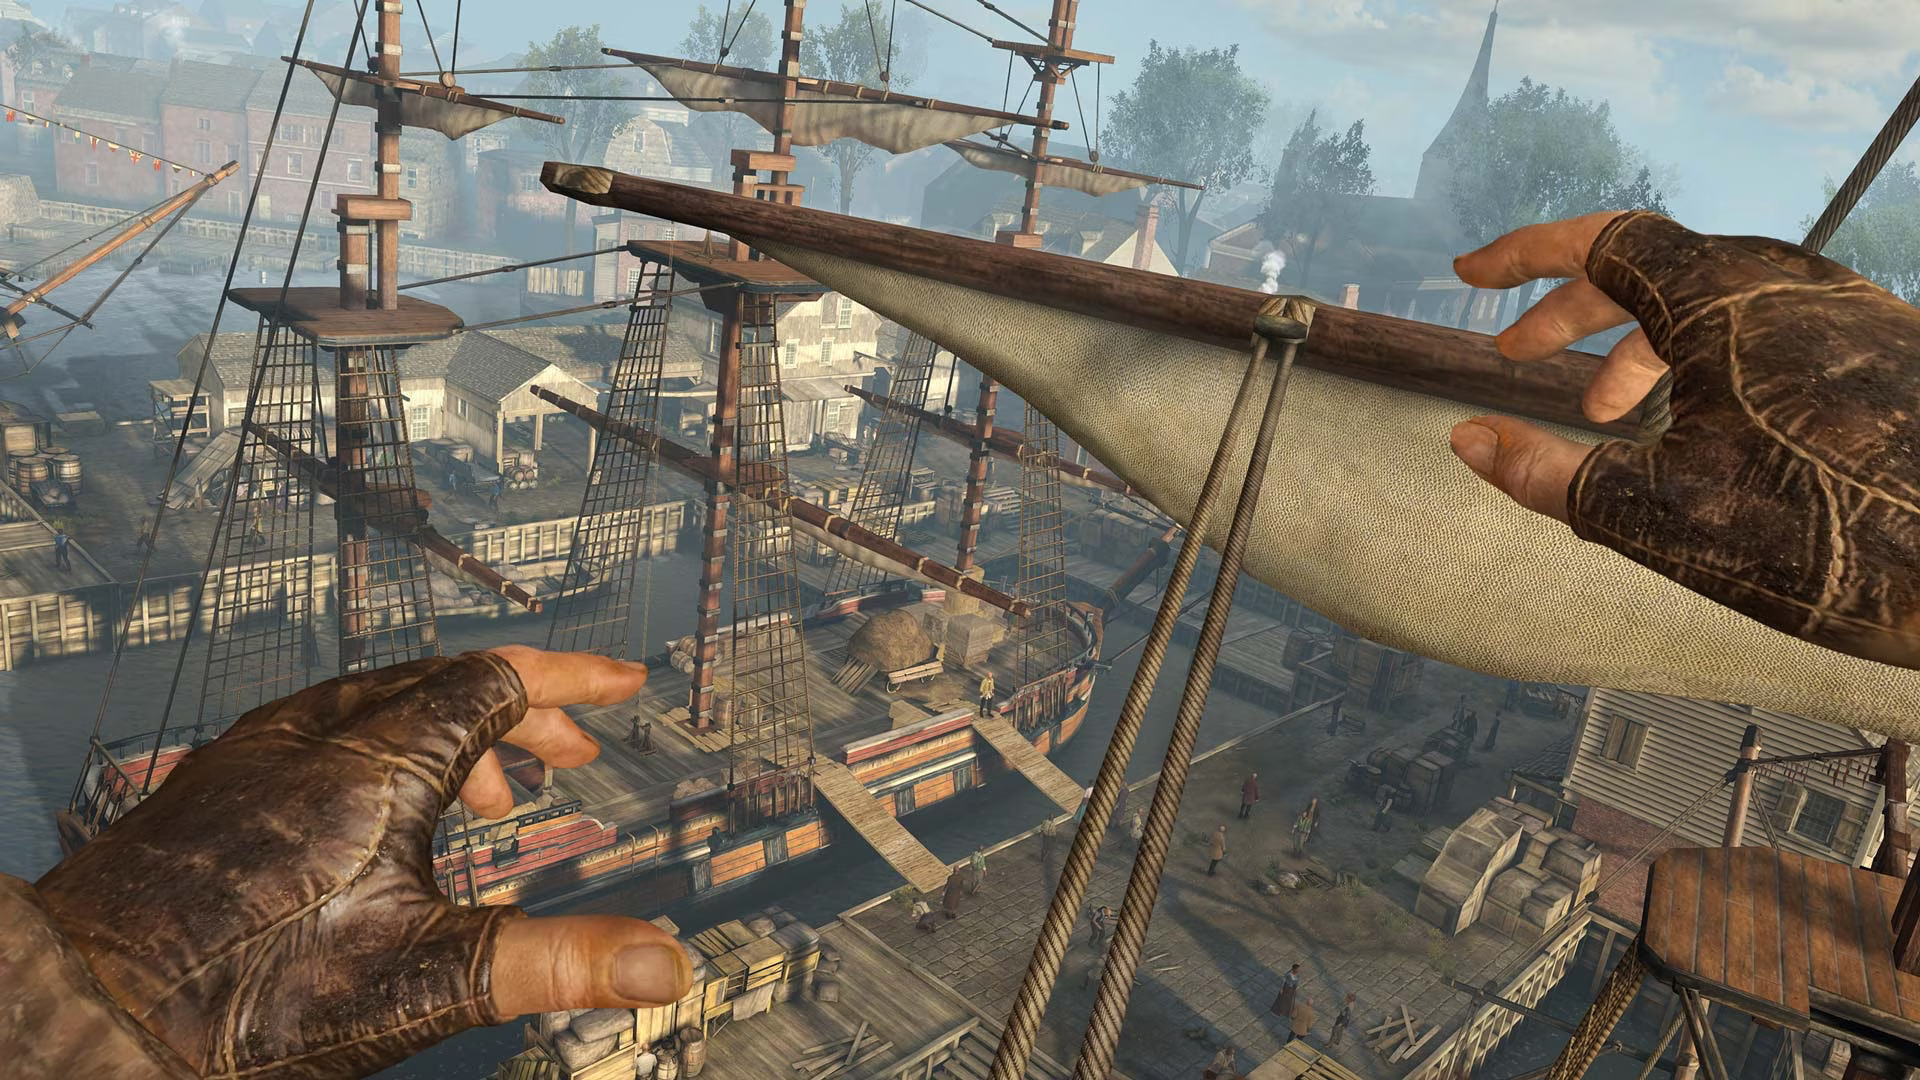 Huge map, great graphics and lots of stealth: insider reveals new details  about Assassin's Creed Red